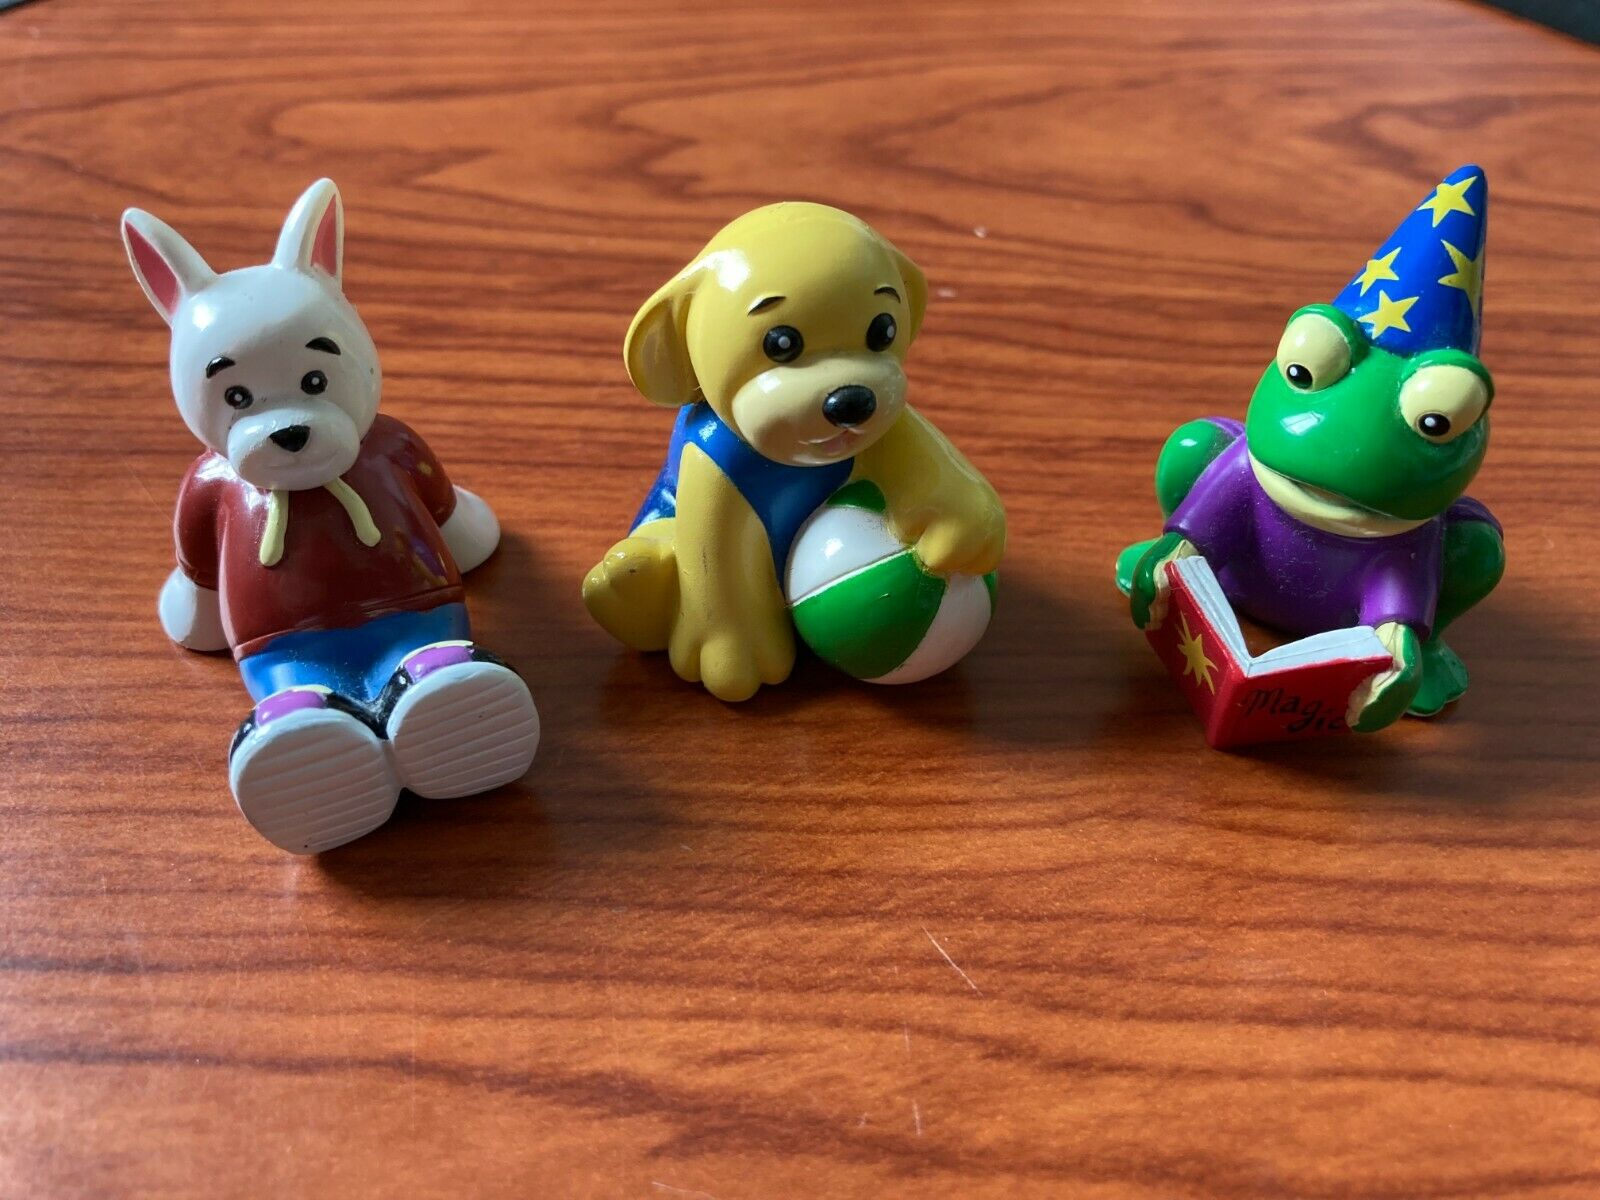 Lot of Webkinz Figurines (3) || Codes Not Included || Excellent Condition